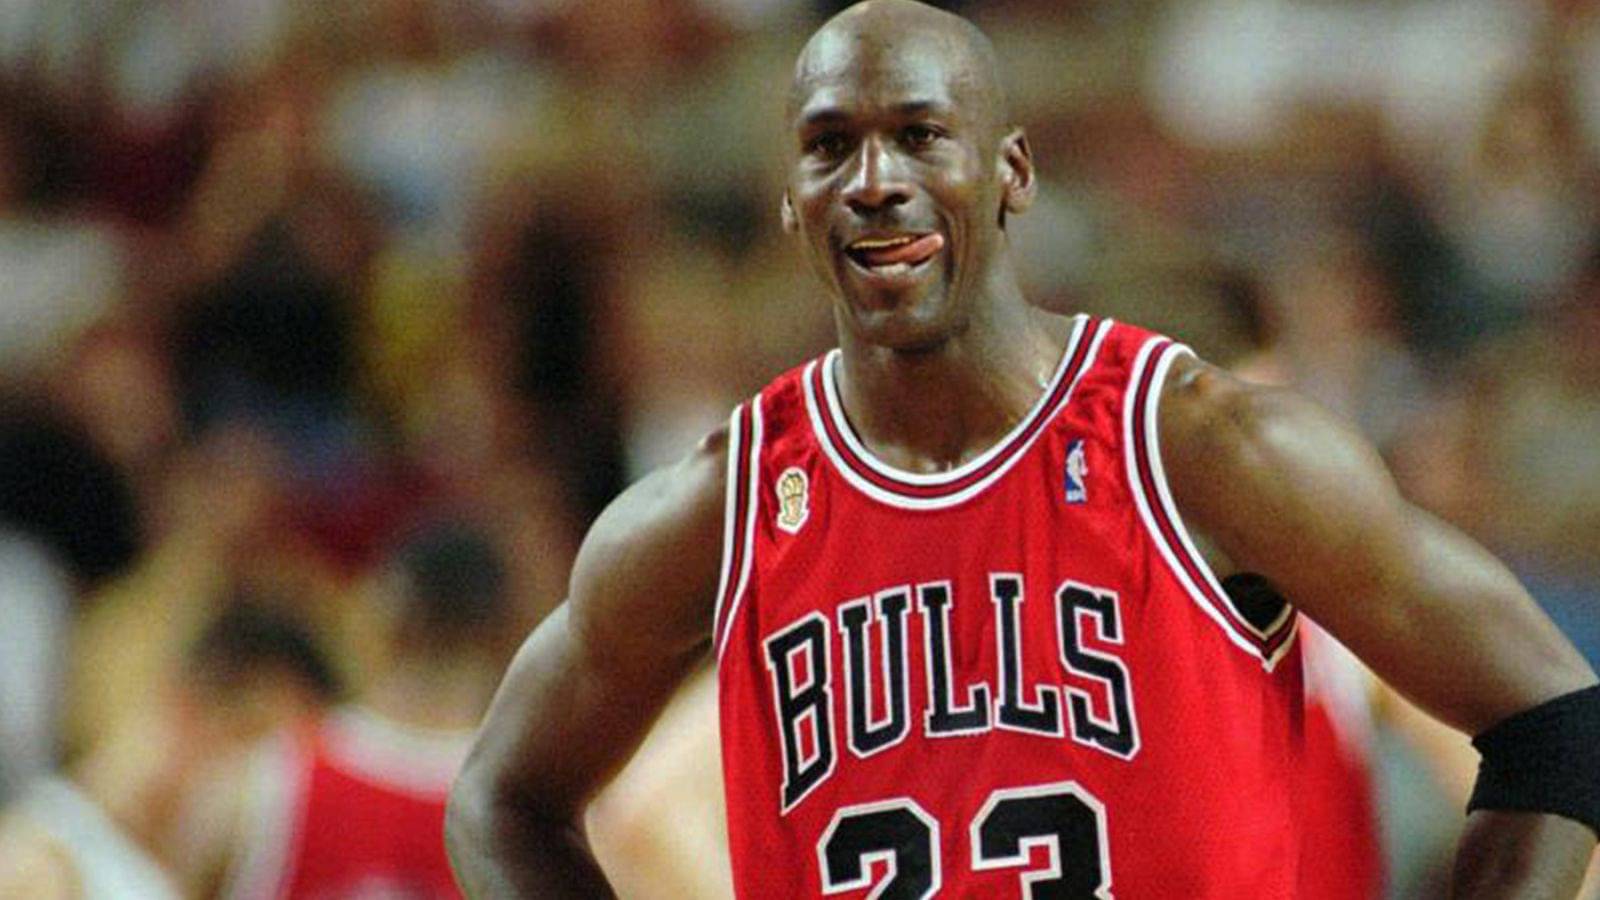 Michael Jordan's $33.1 million contract in 97-98 season stayed the highest salary in the NBA until 2018